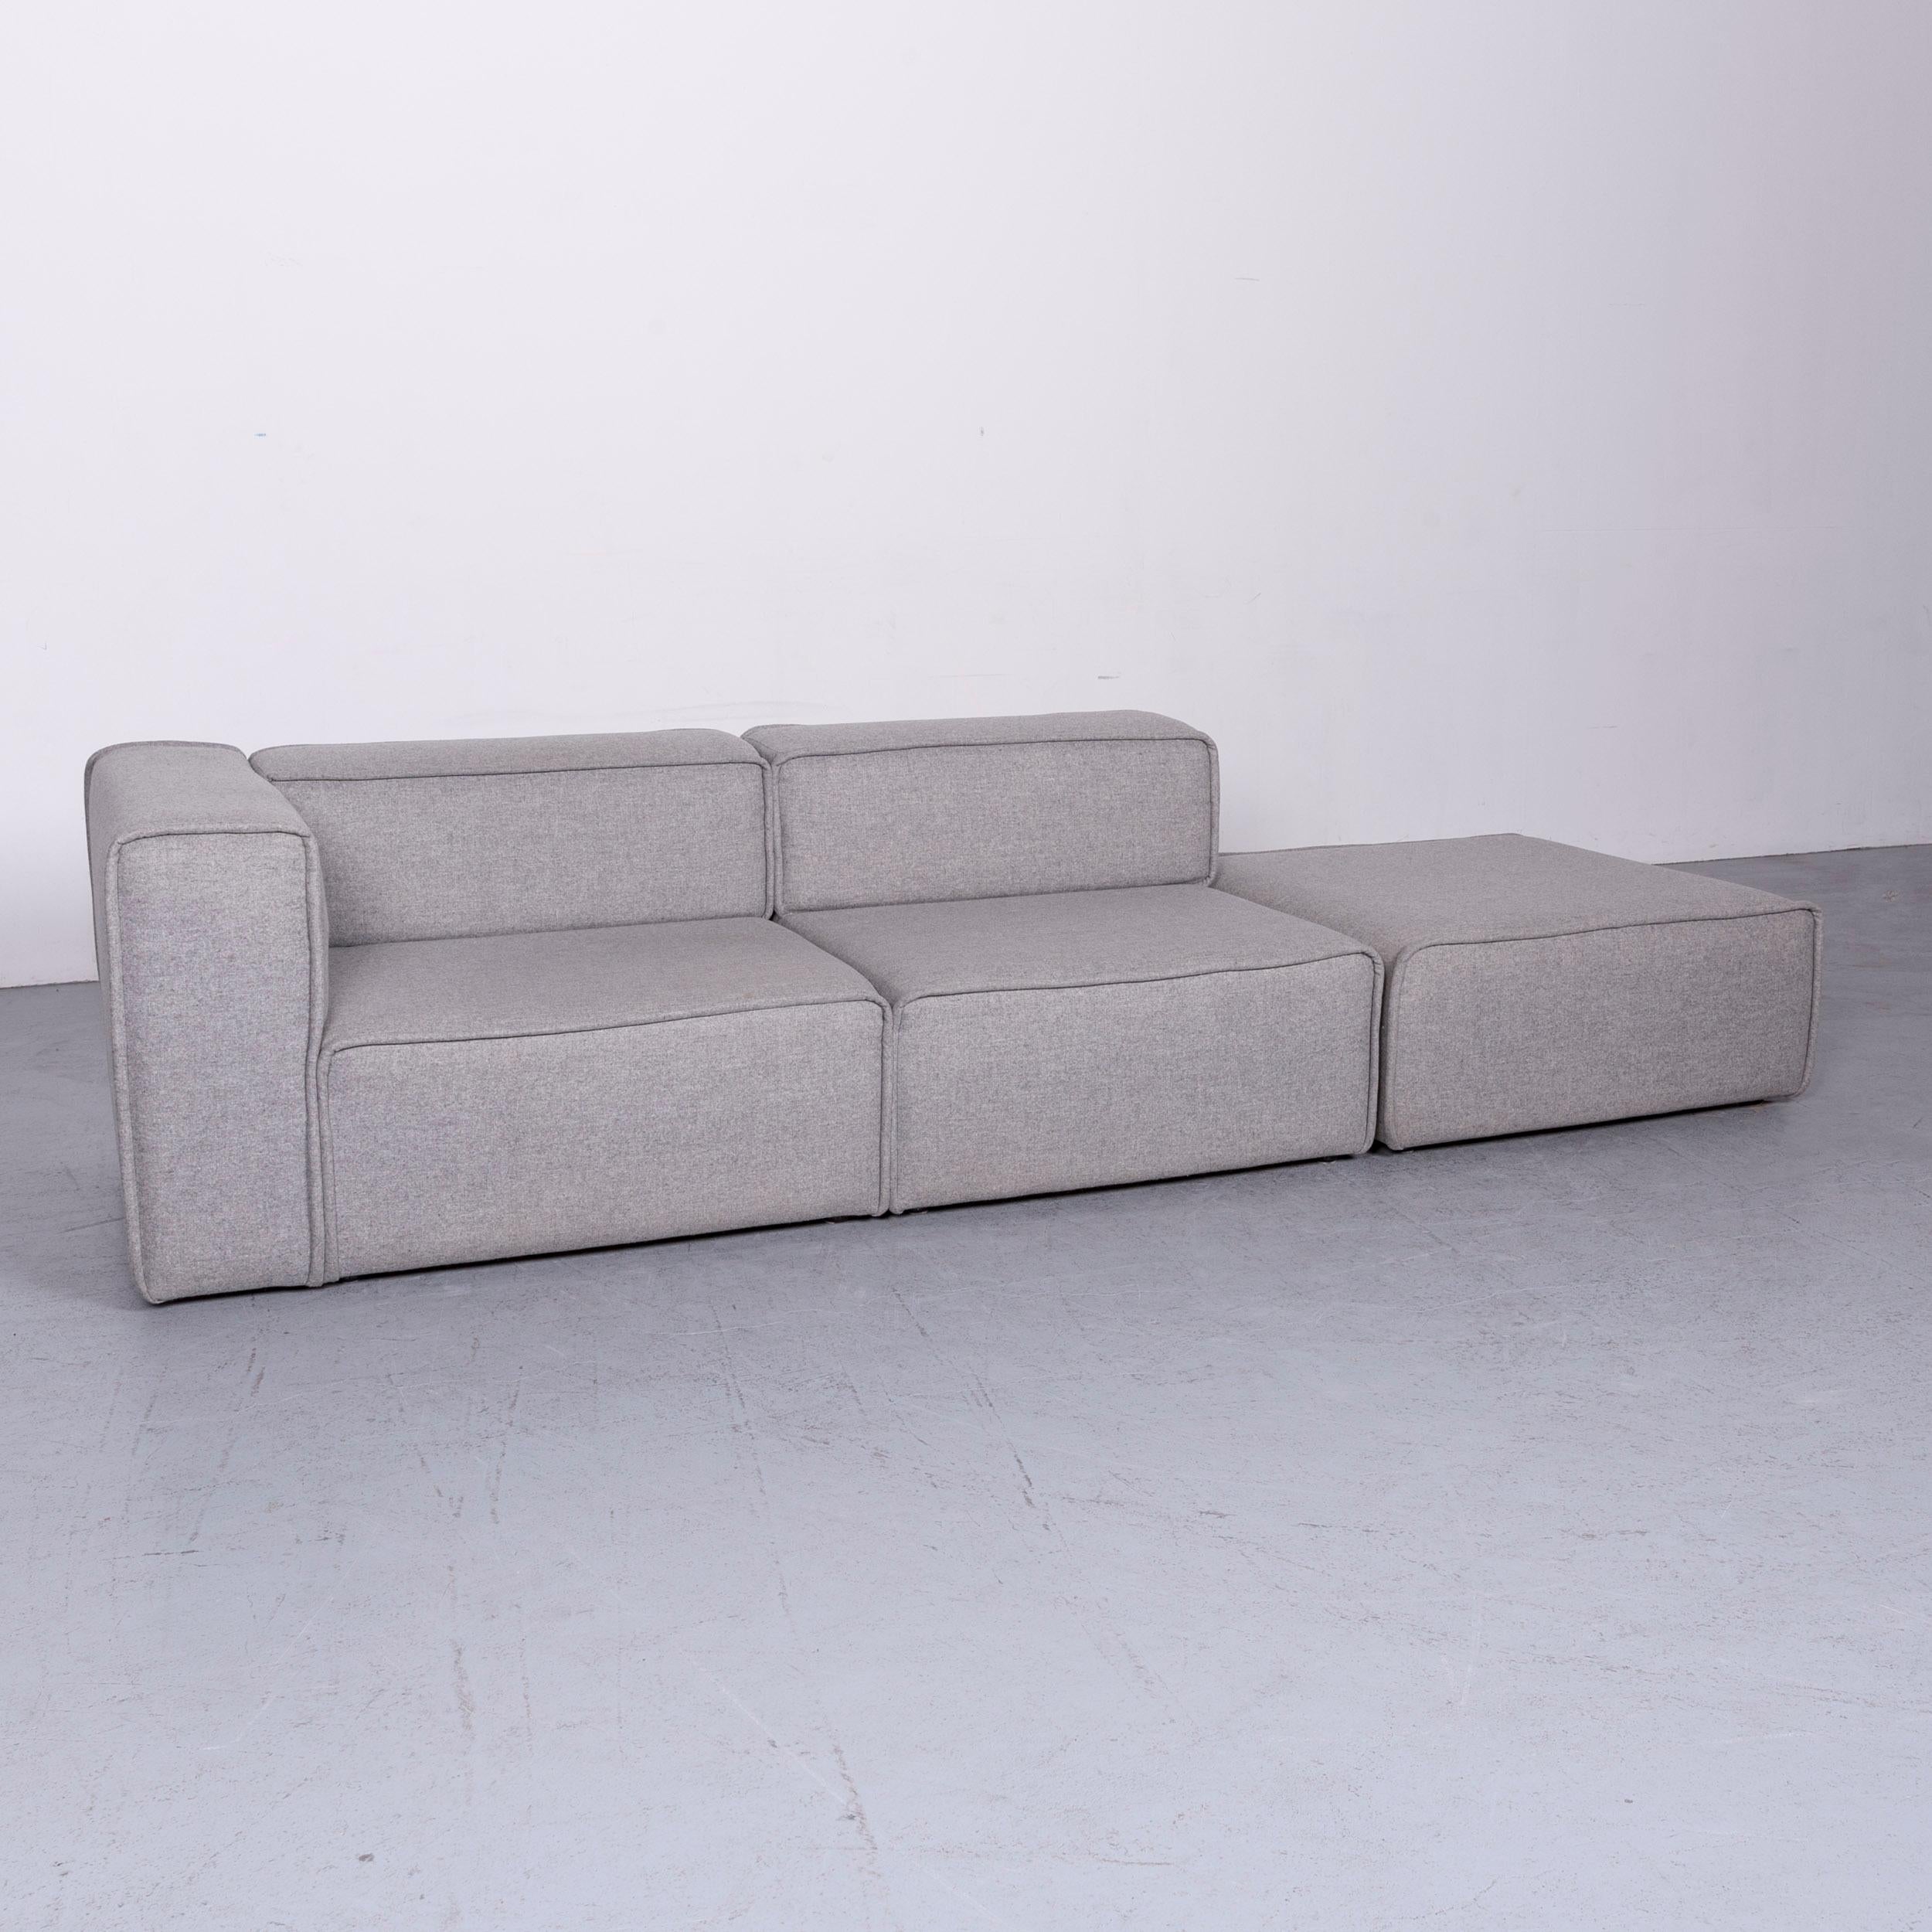 We bring to you a BoConcept carmo designer sofa grey three-seat couch.